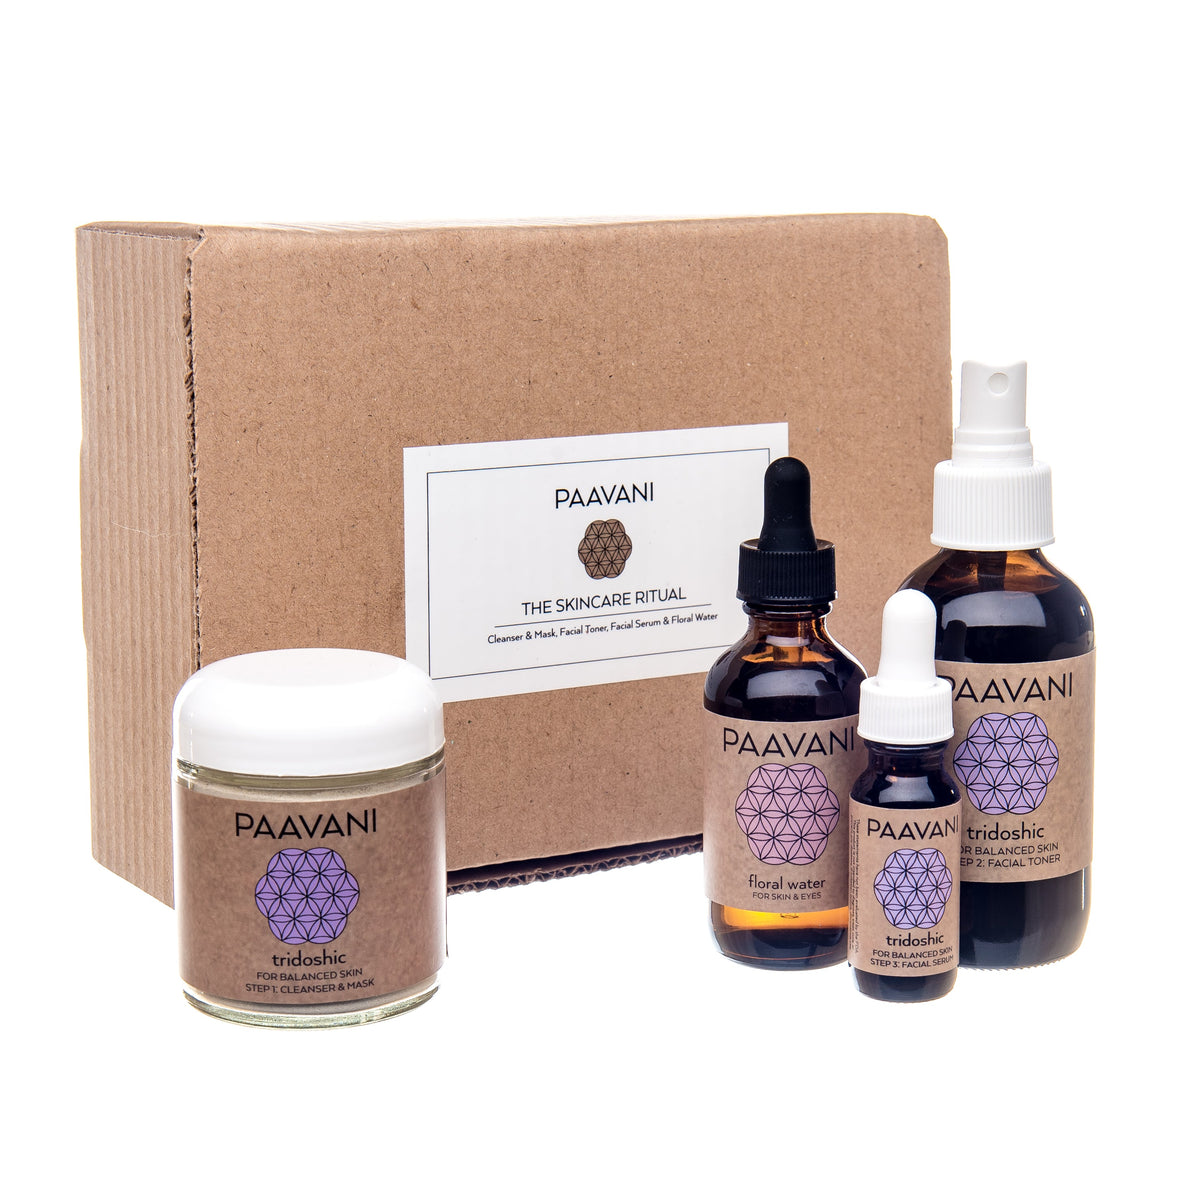 * Paavani Ayurveda - The Tridoshic Skincare Ritual including Ear Oil, Body Oil, Nose Oil, Pulling Oil and Floral Water , Ayurveda, Ayurvedic Bundle-1